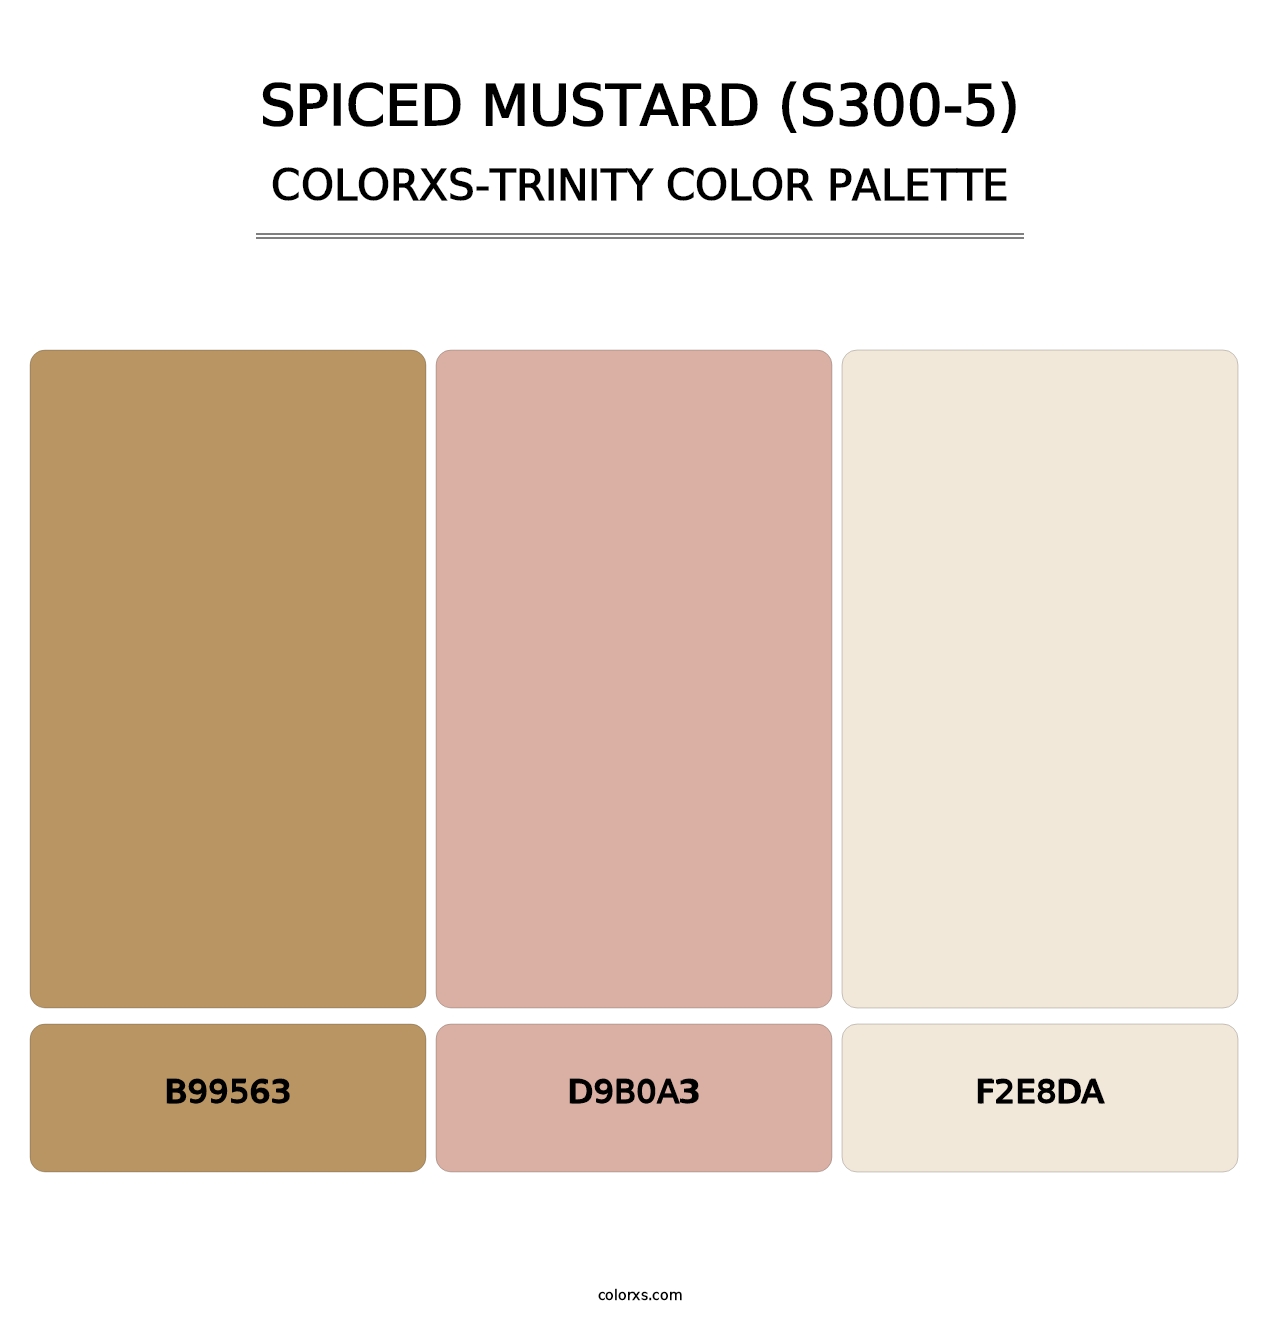 Spiced Mustard (S300-5) - Colorxs Trinity Palette